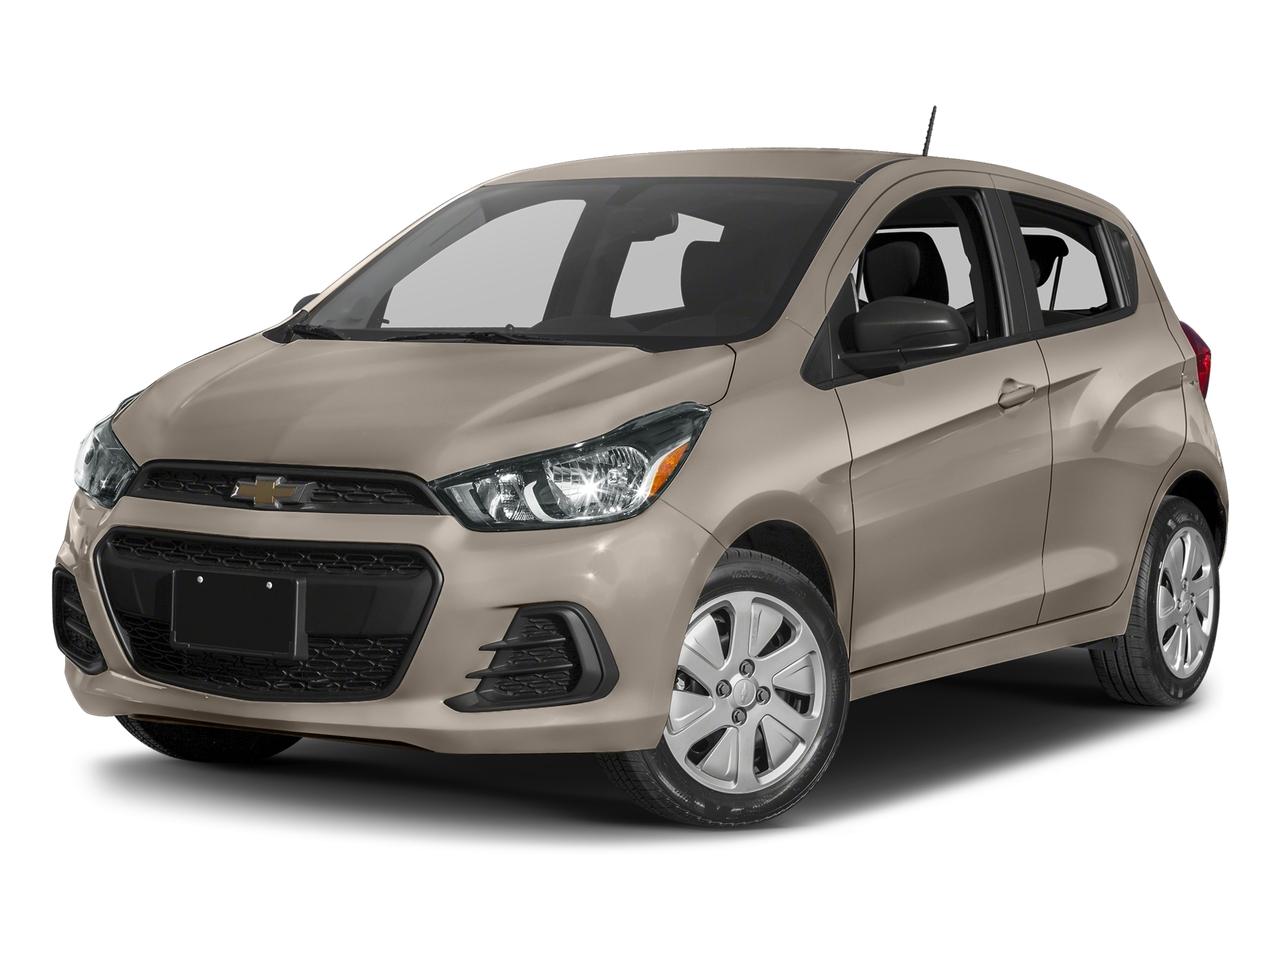 2017 Chevrolet Spark Vehicle Photo in NILES, IL 60714